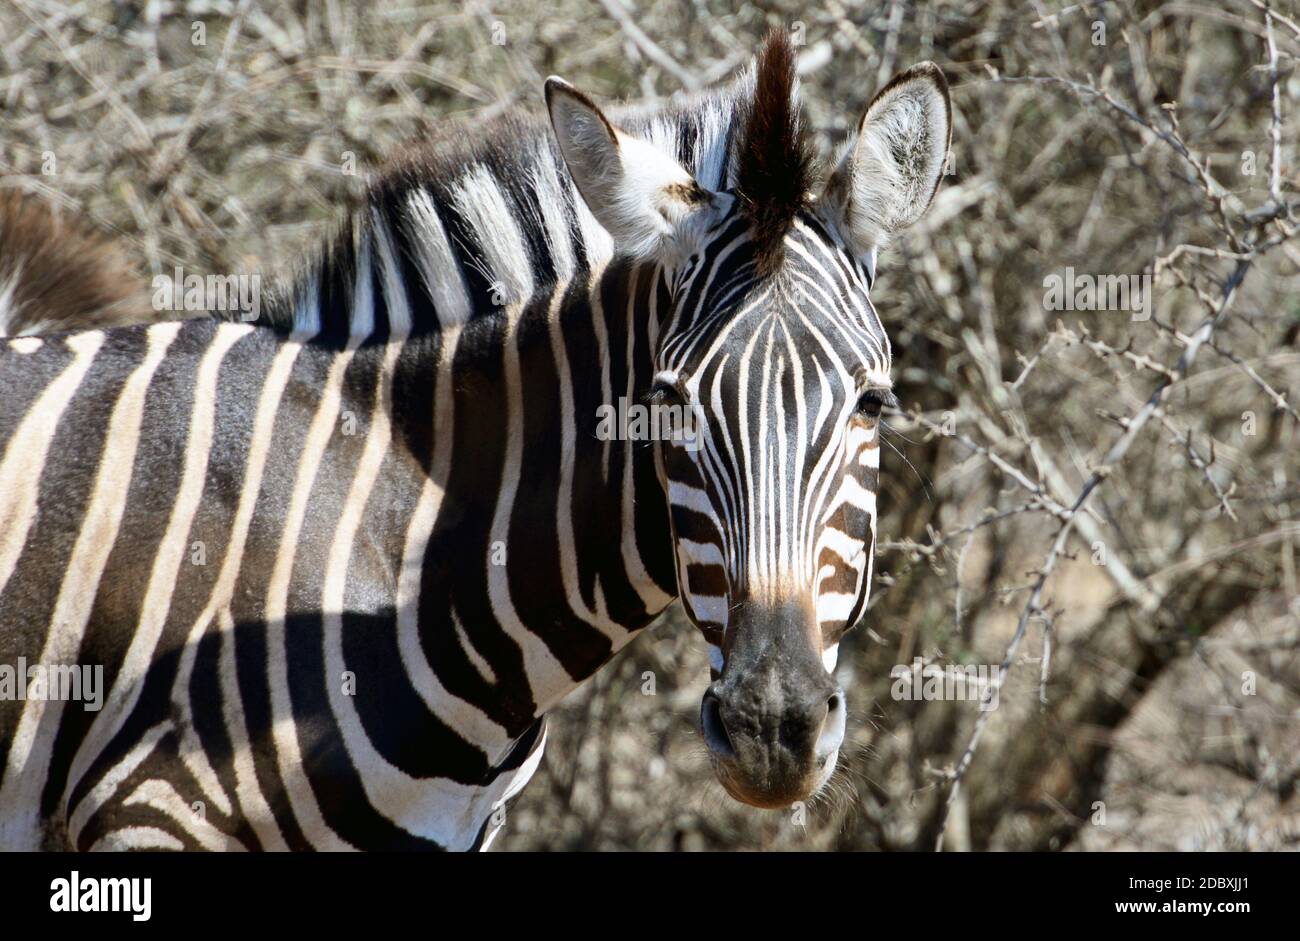 Detail of zebras in the Kruger National Park in South Africa Stock Photo